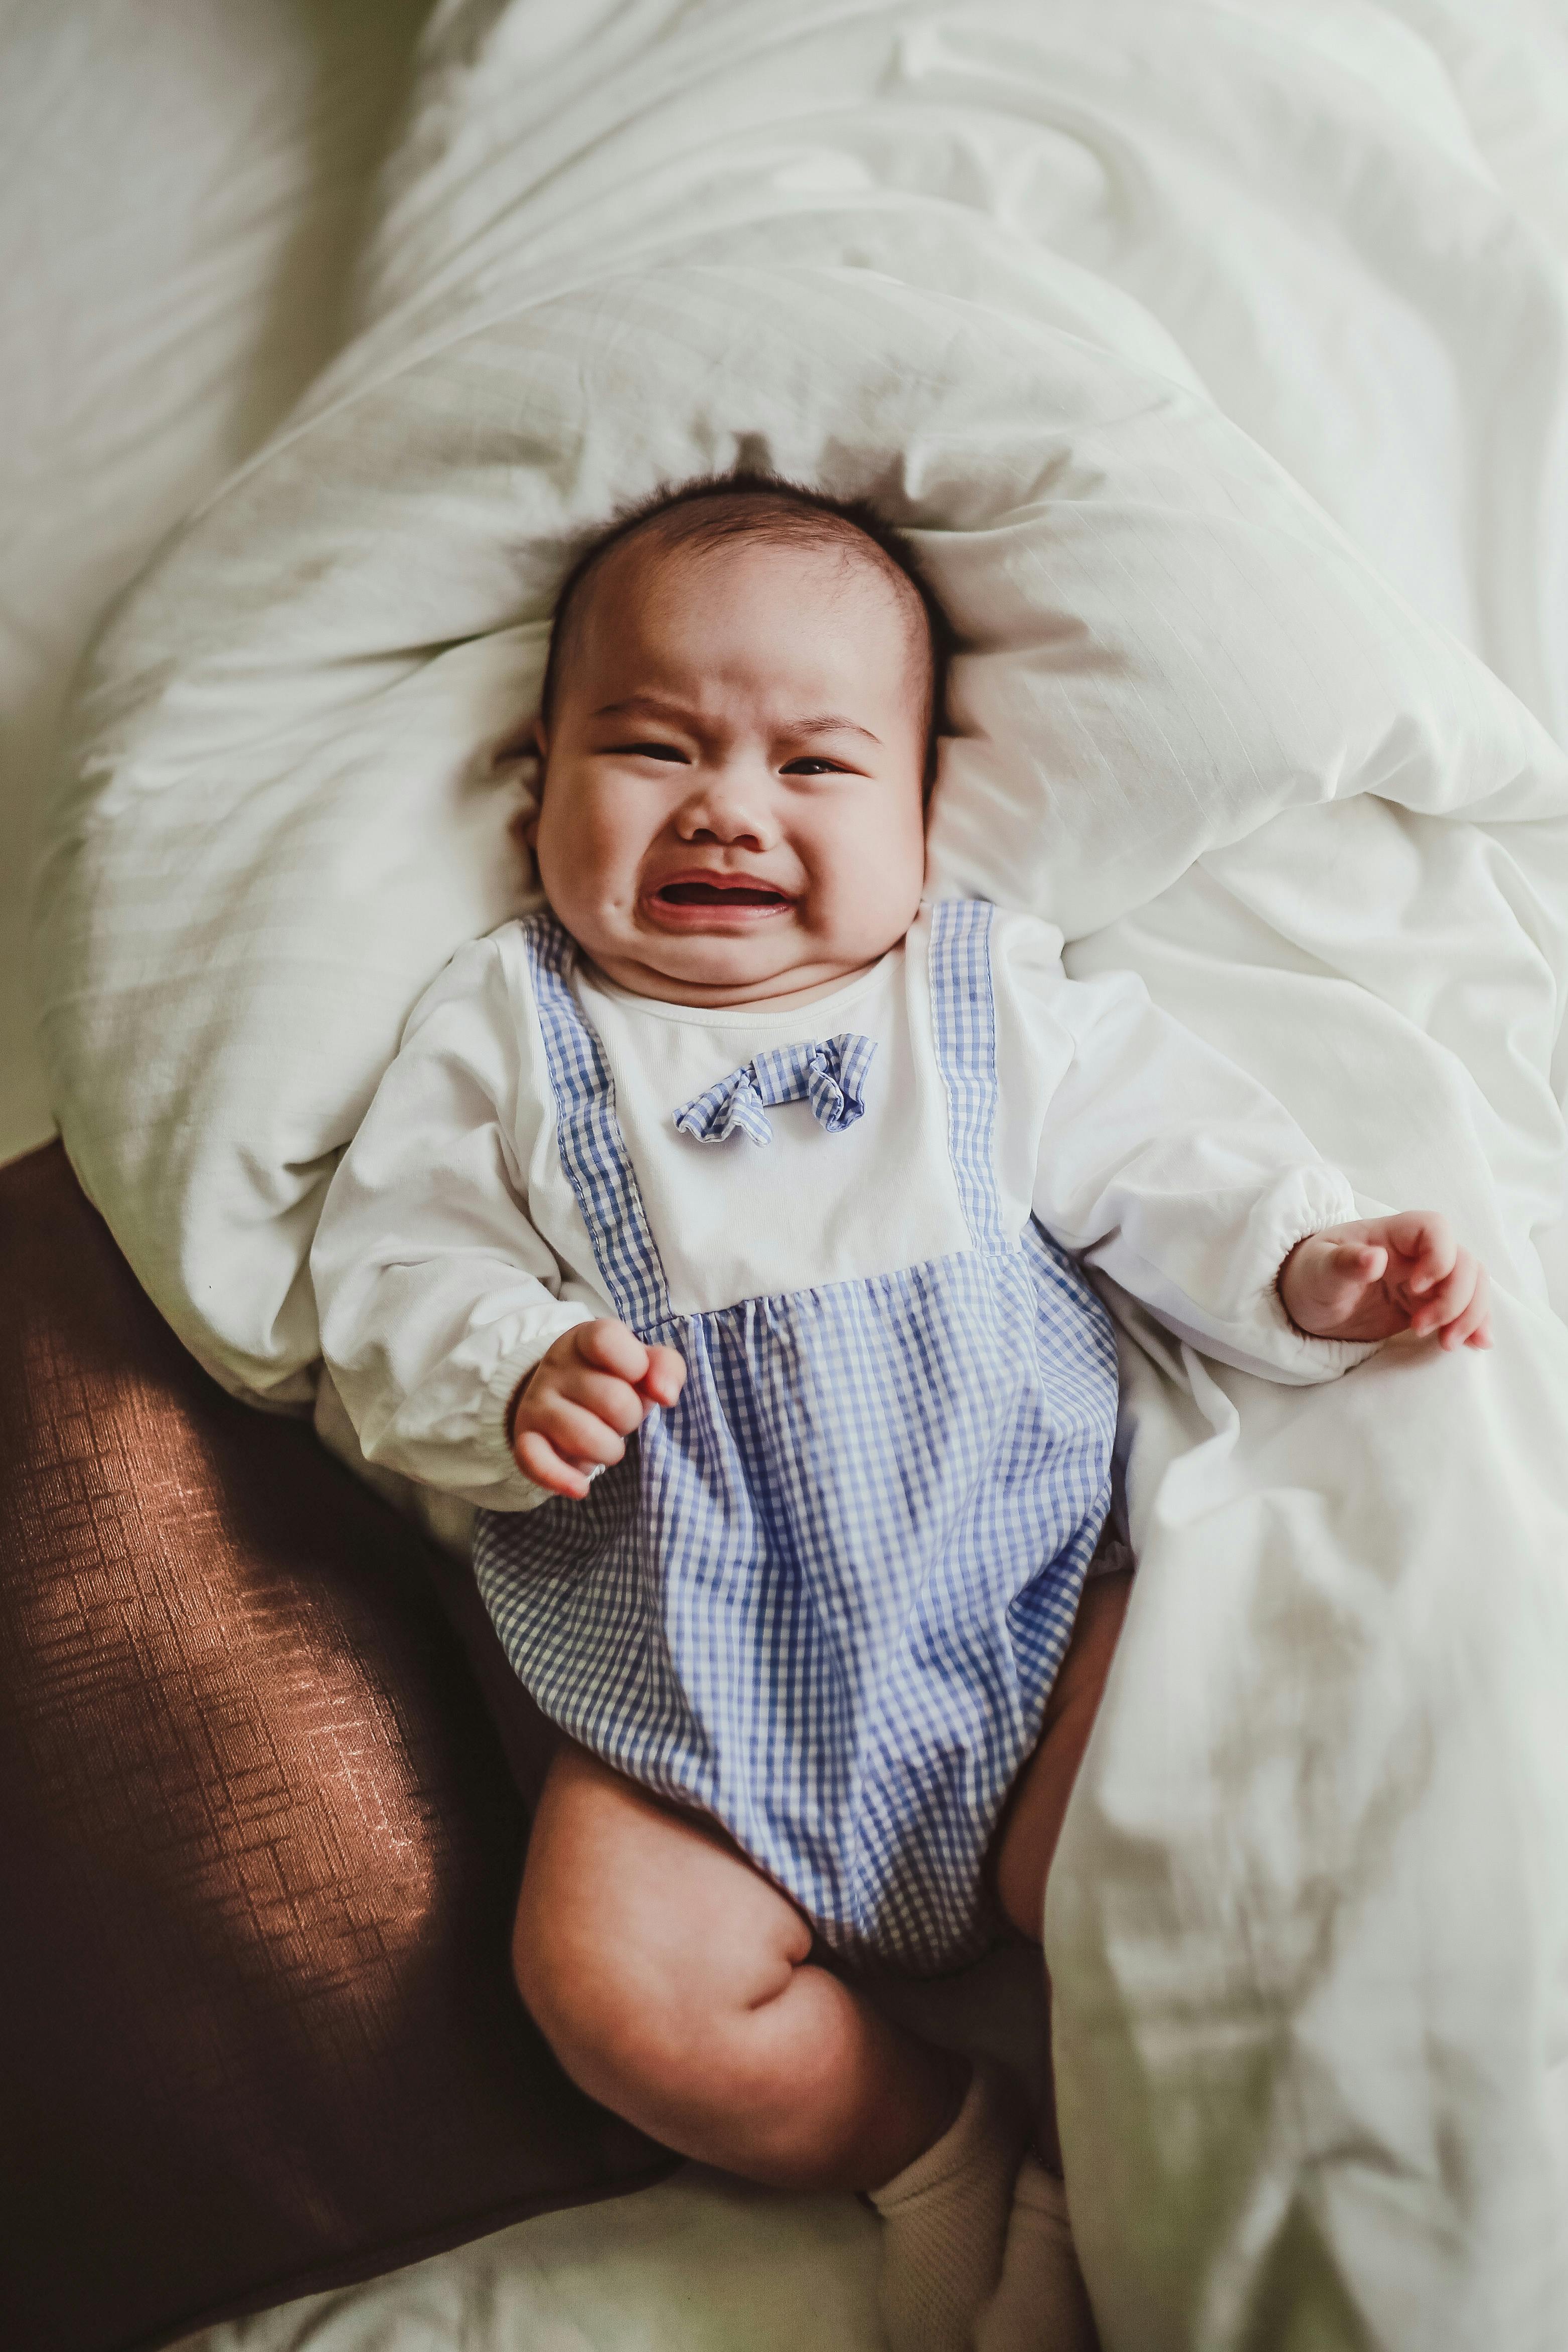 Baby Lily crying in the background | Source: Pexels